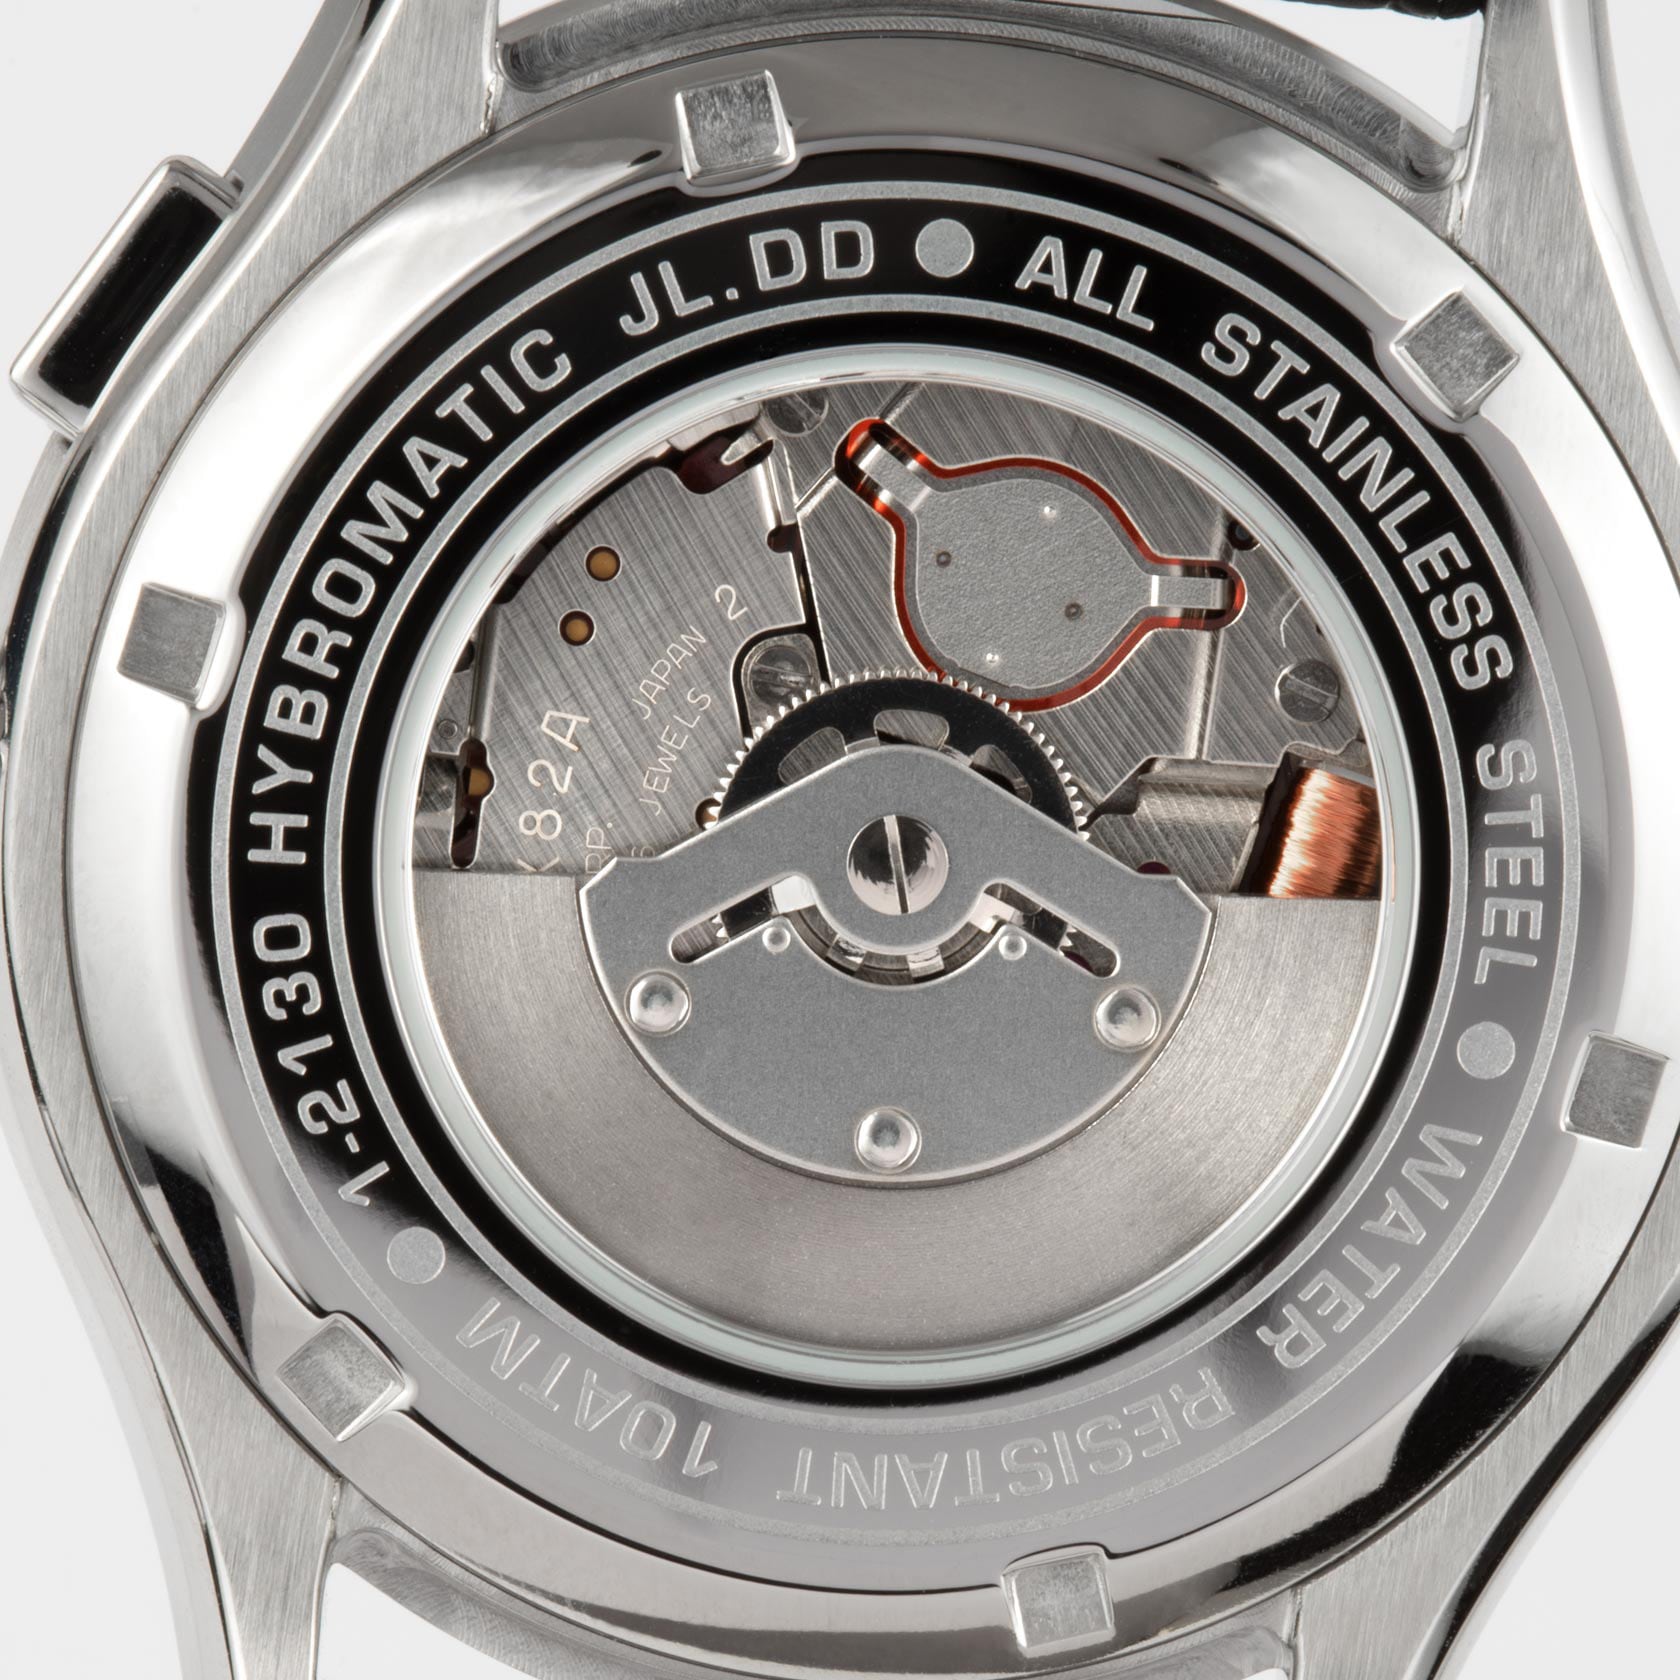 Kineticuhr bei Lemans »Hybromatic, 1-2130A« UNIVERSAL online Jacques